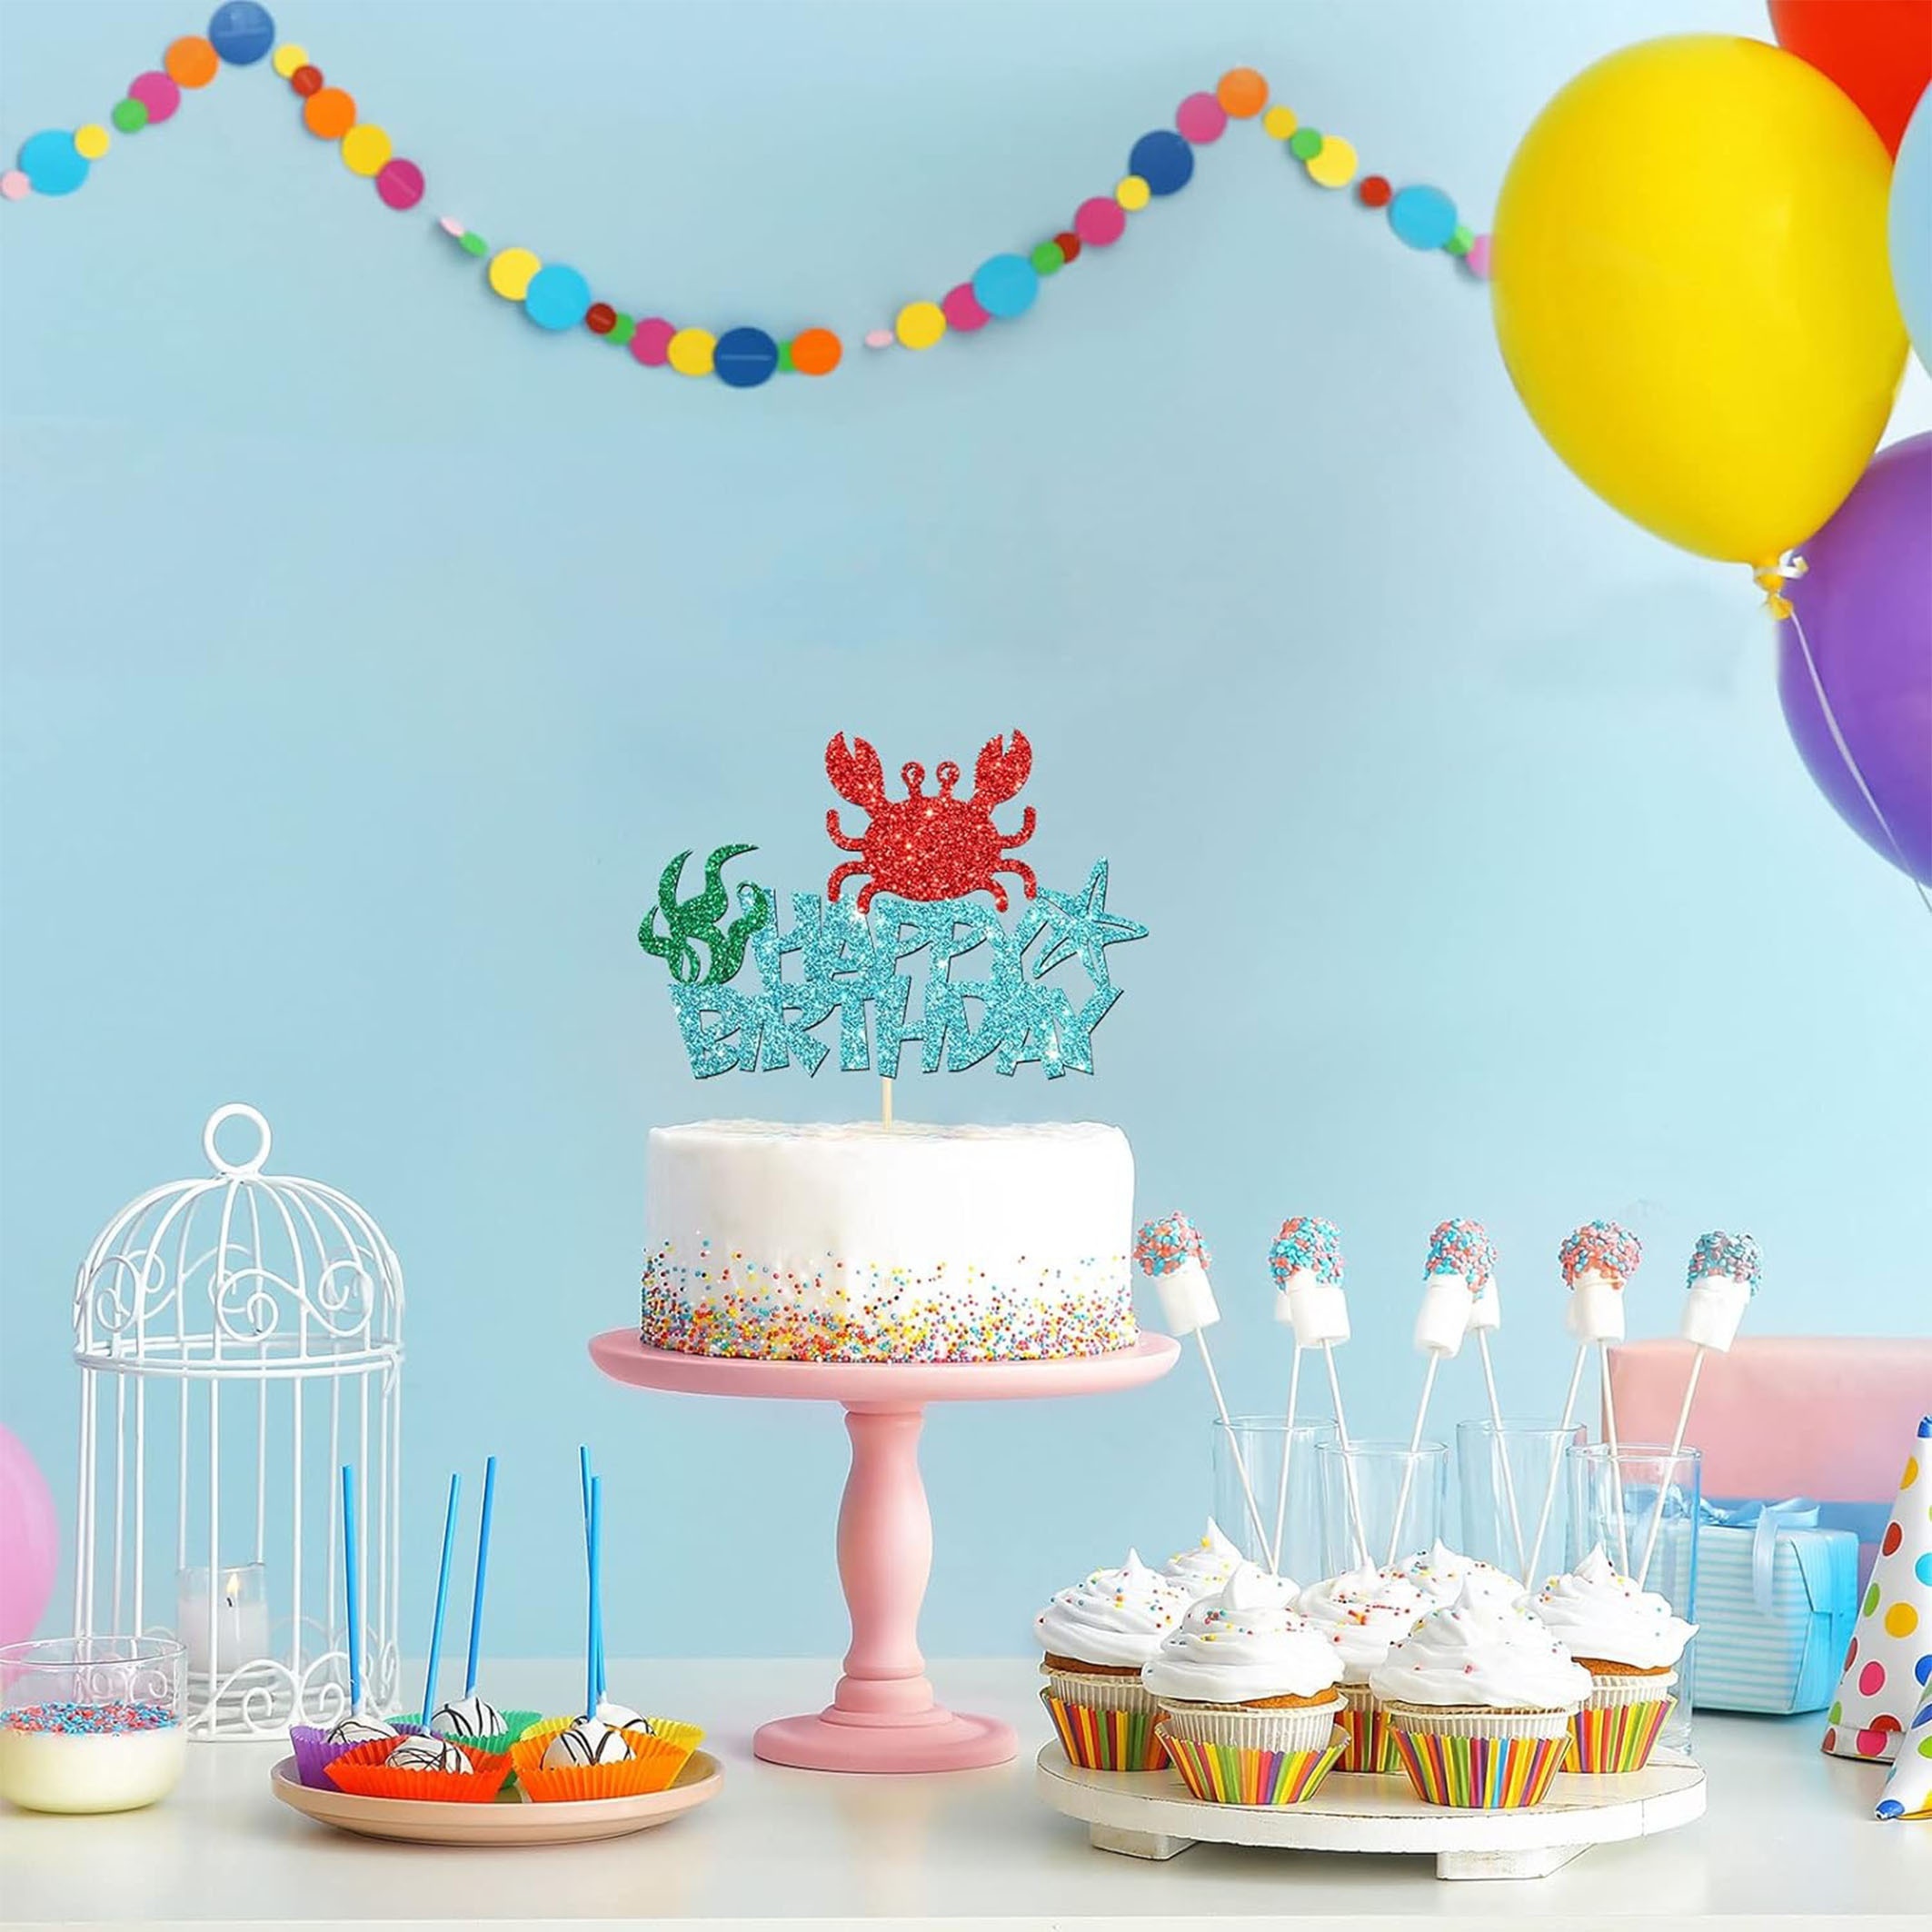 

Sky Blue Under The Sea Birthday Cake Topper With Crab & Crawfish - Perfect For Kids' 1st, 2nd, 3rd Birthdays & Baby Showers